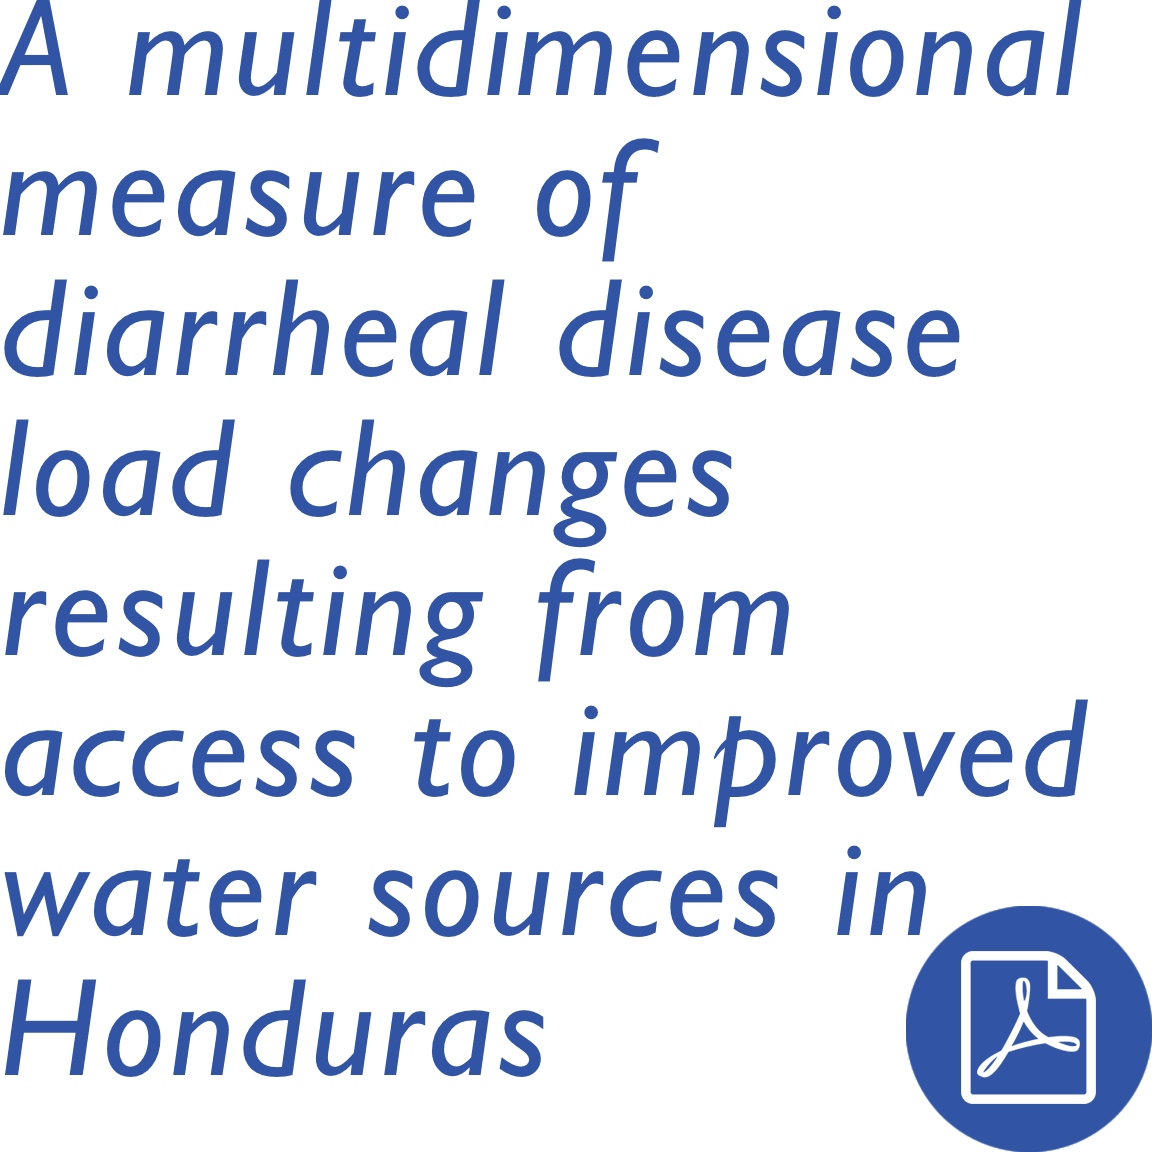 A multidimensional measure of diarrheal disease load changes resulting from access to improved water sources in Honduras